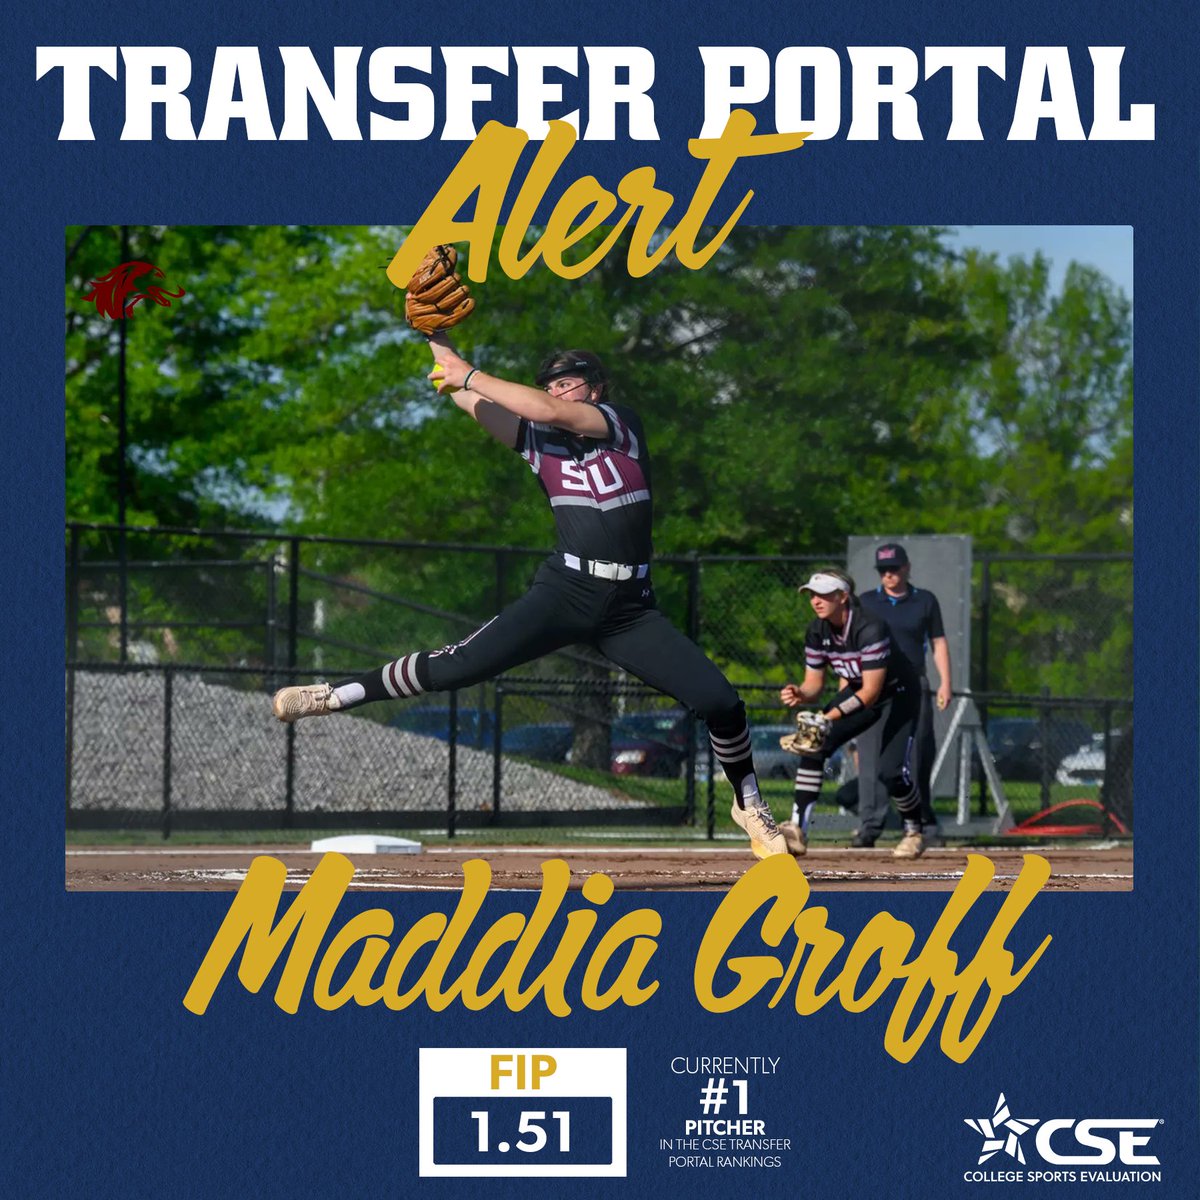 A new #1 pitcher has been named in the CSE Transfer Portal Rankings! Maddia Groff finished her standout freshman season as the MVC Freshman of the Year and MVC Pitcher of the Year. 1.11 ERA | 244 K's | 0.777 WHIP Check out more of Maddia's stats and rankings⬇️